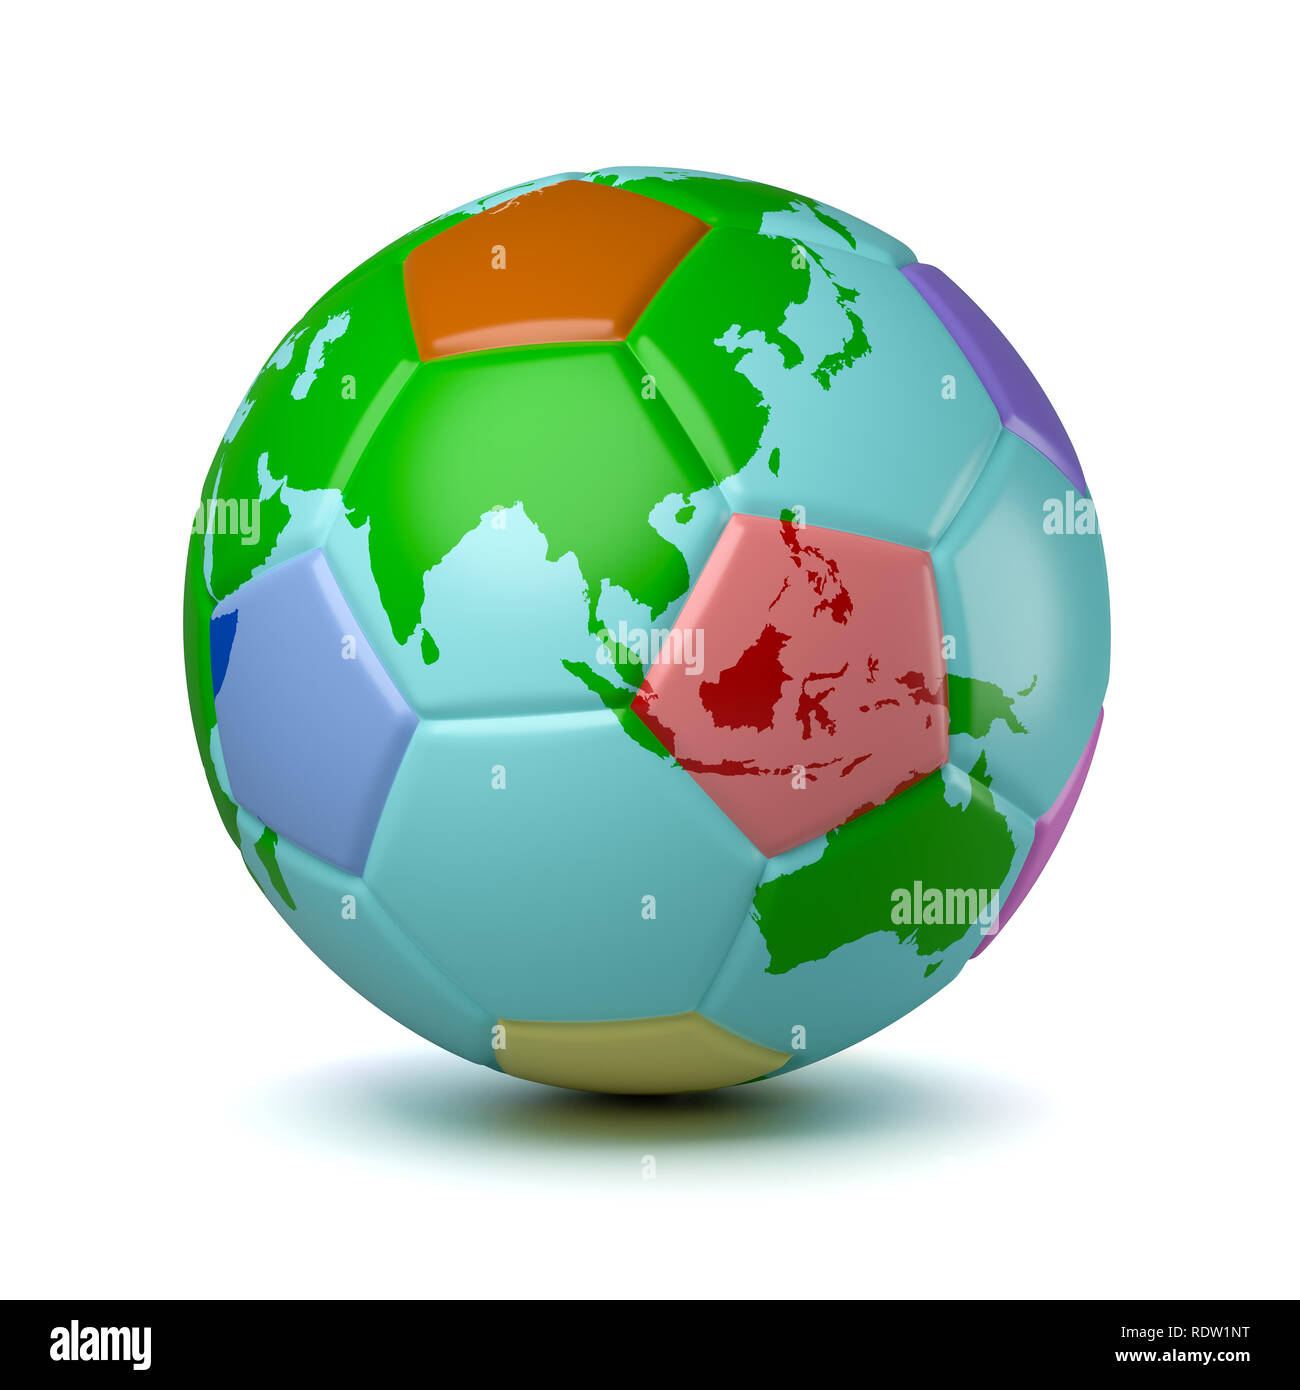 Colorful Soccerball with World Map 3D Illustration on White Background Stock Photo